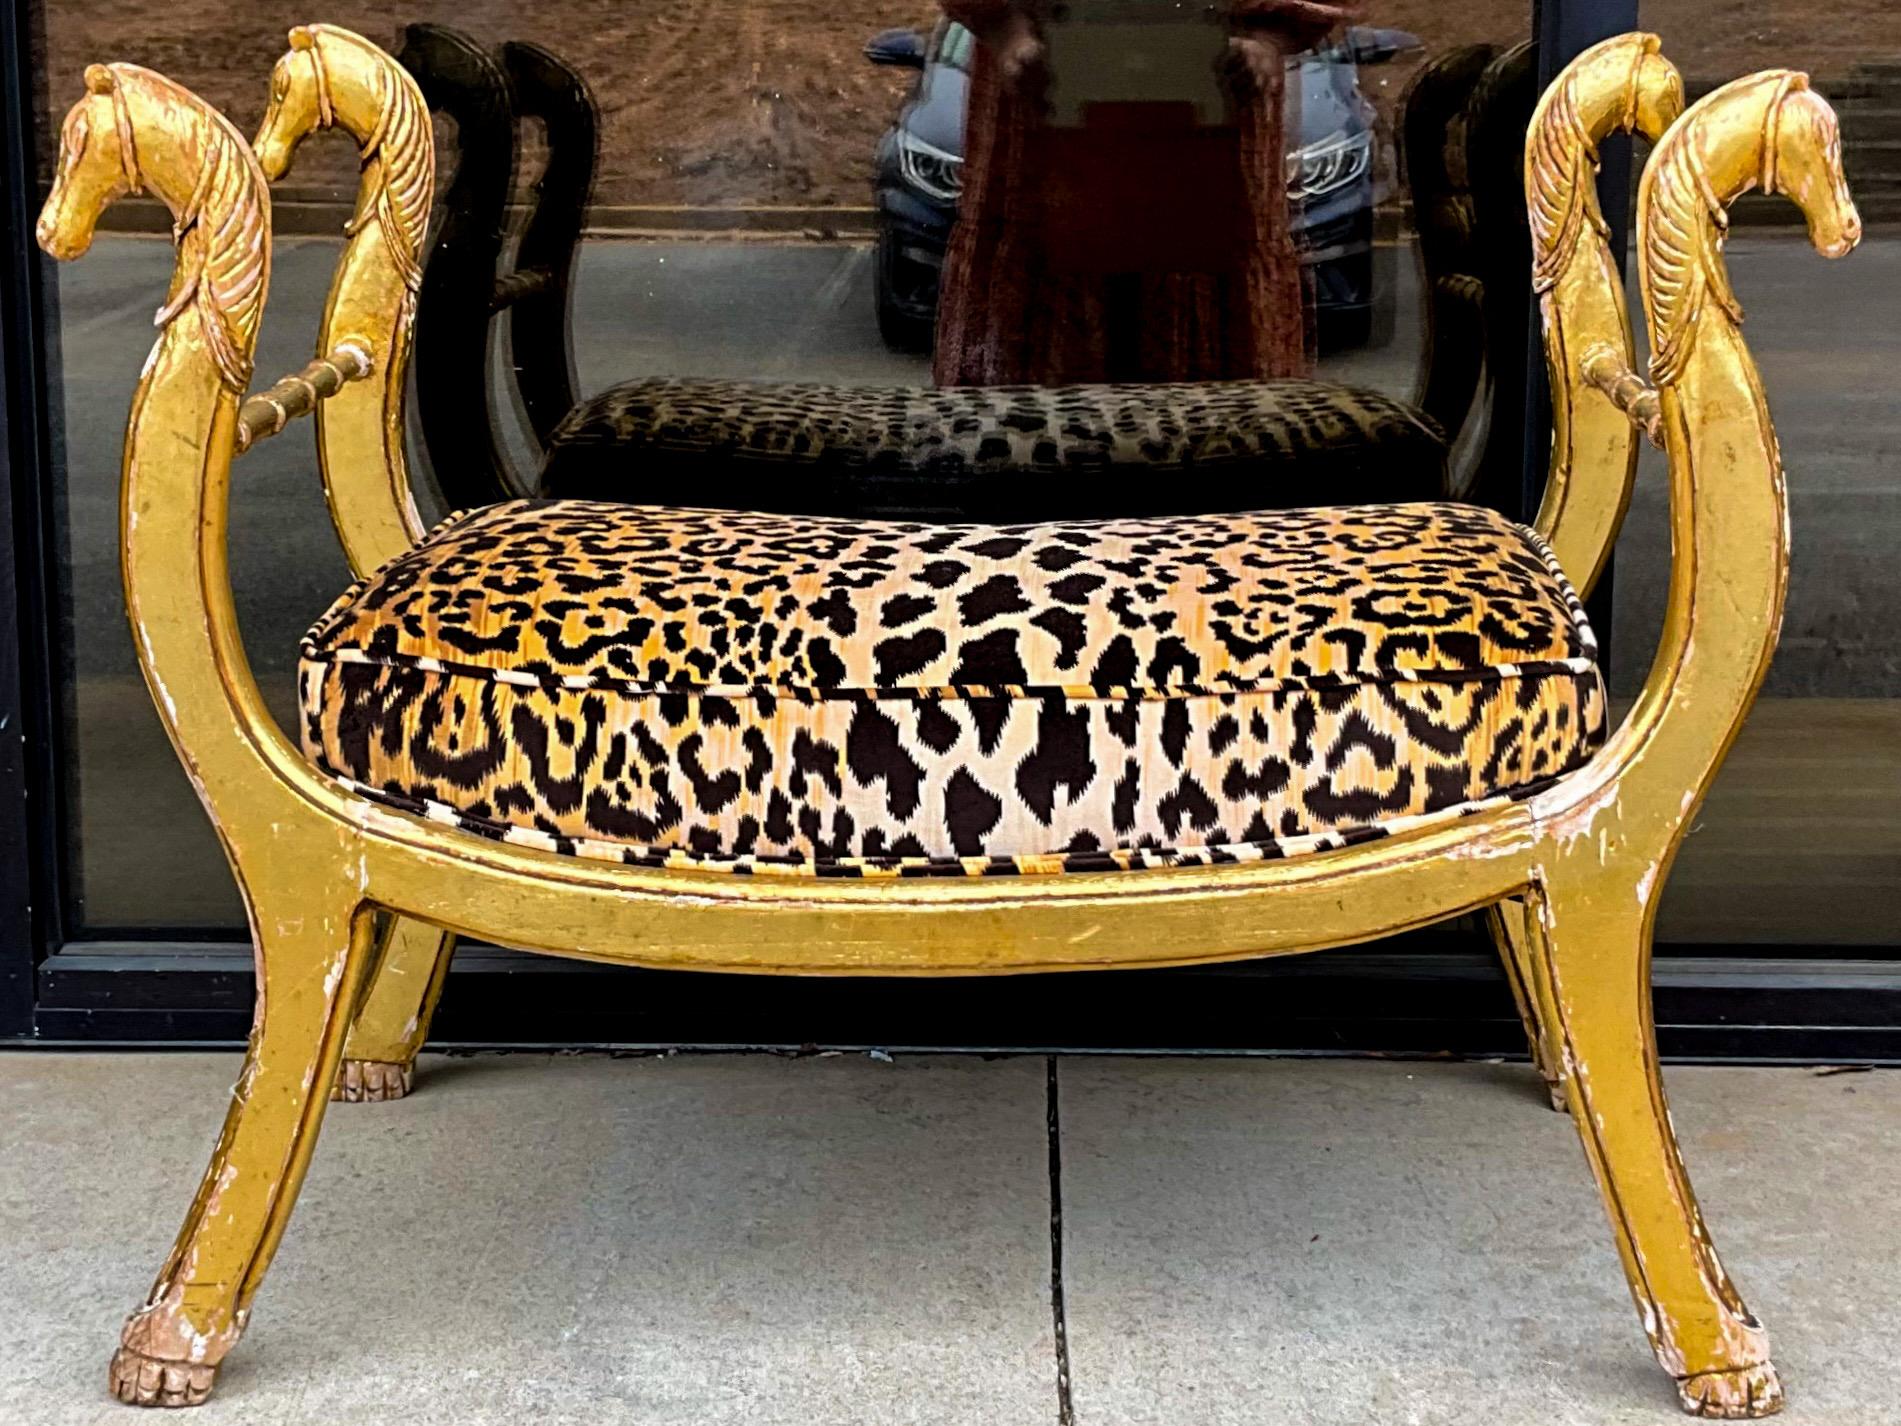 19th-C. Neo-Classical Maison Jansen Style Giltwood Bench In Leopard Velvet  For Sale 2